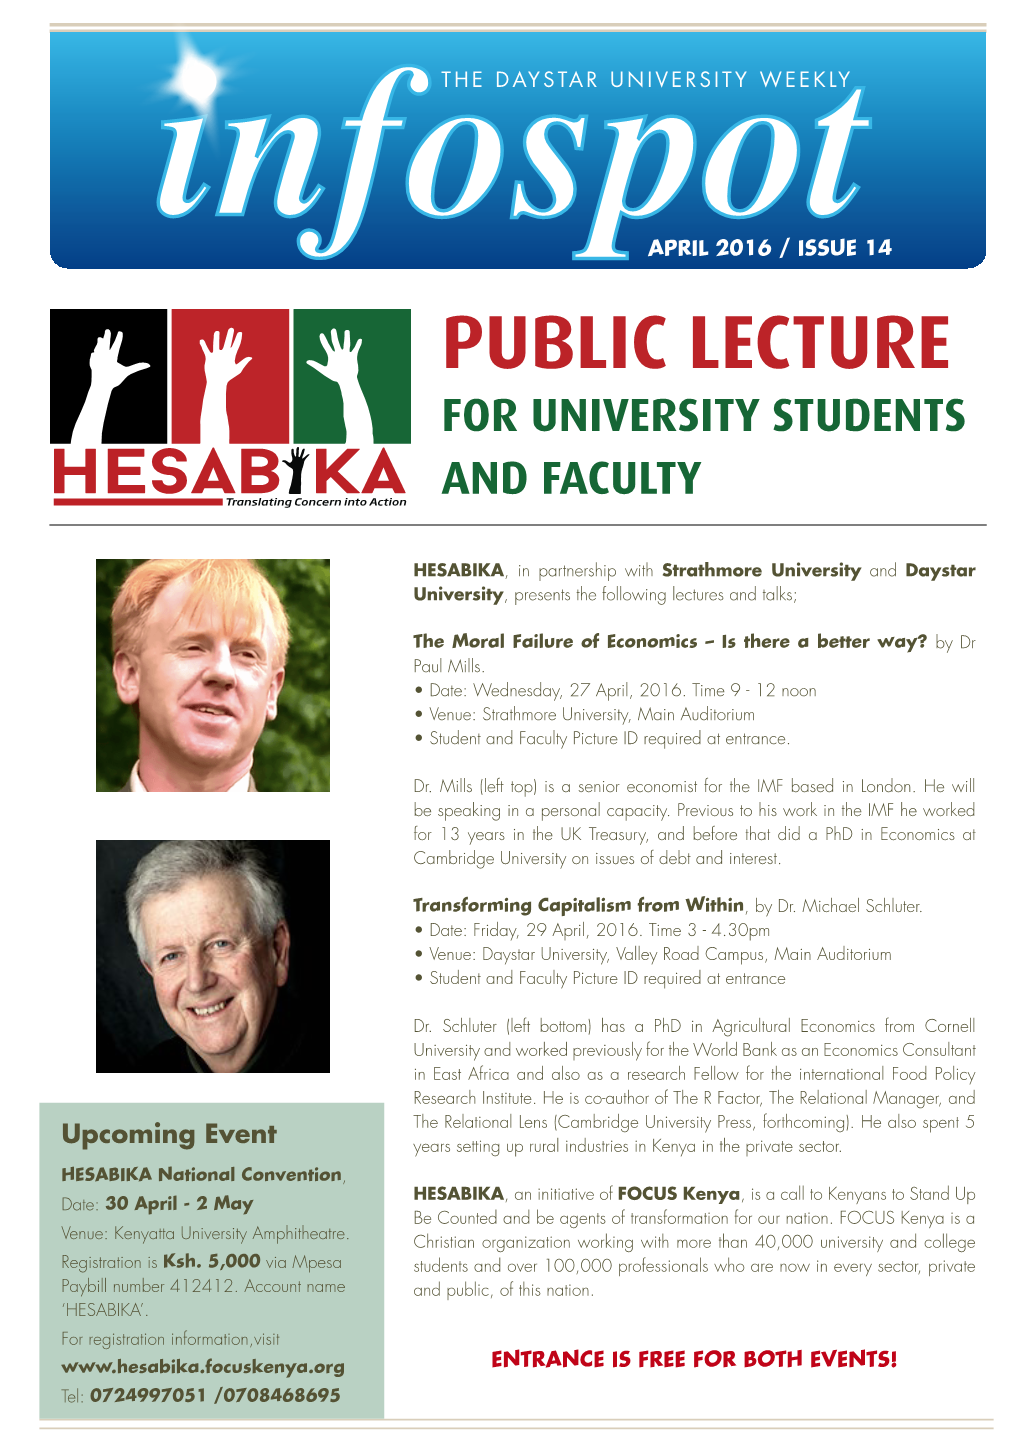 Public Lecture for University Students and Faculty